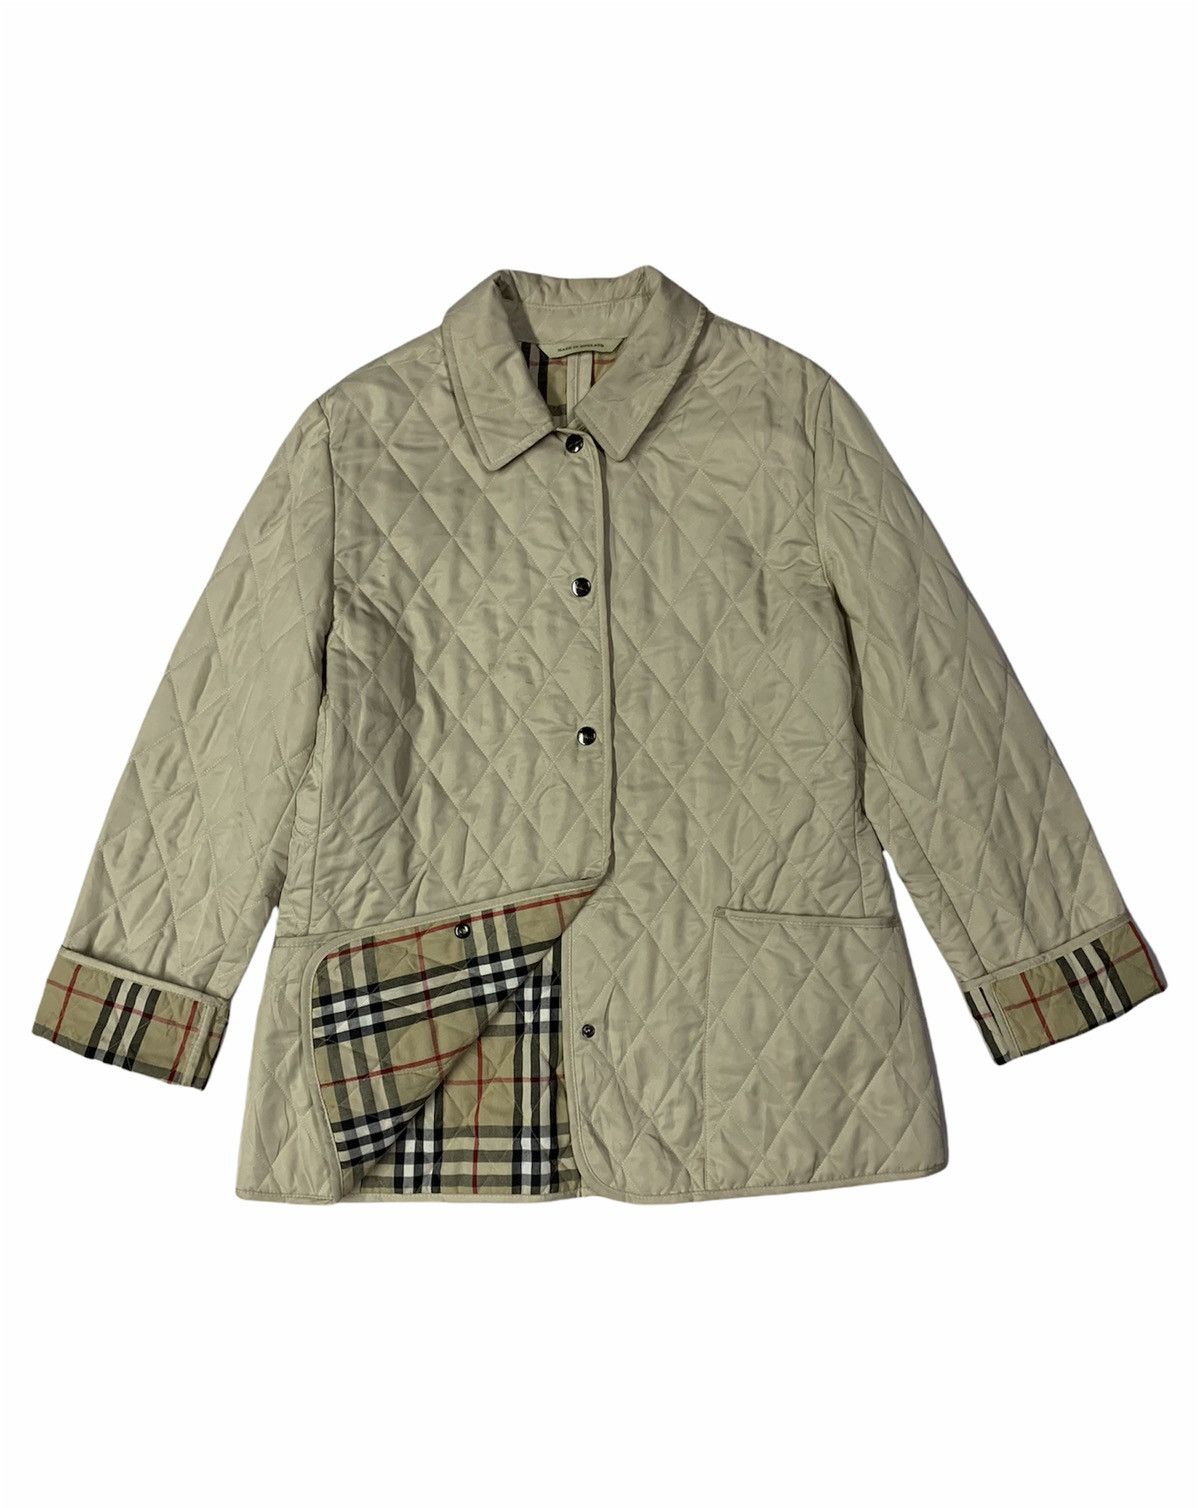 🔥BURBERRY QUILTED JACKETS NOVACHECK - 2